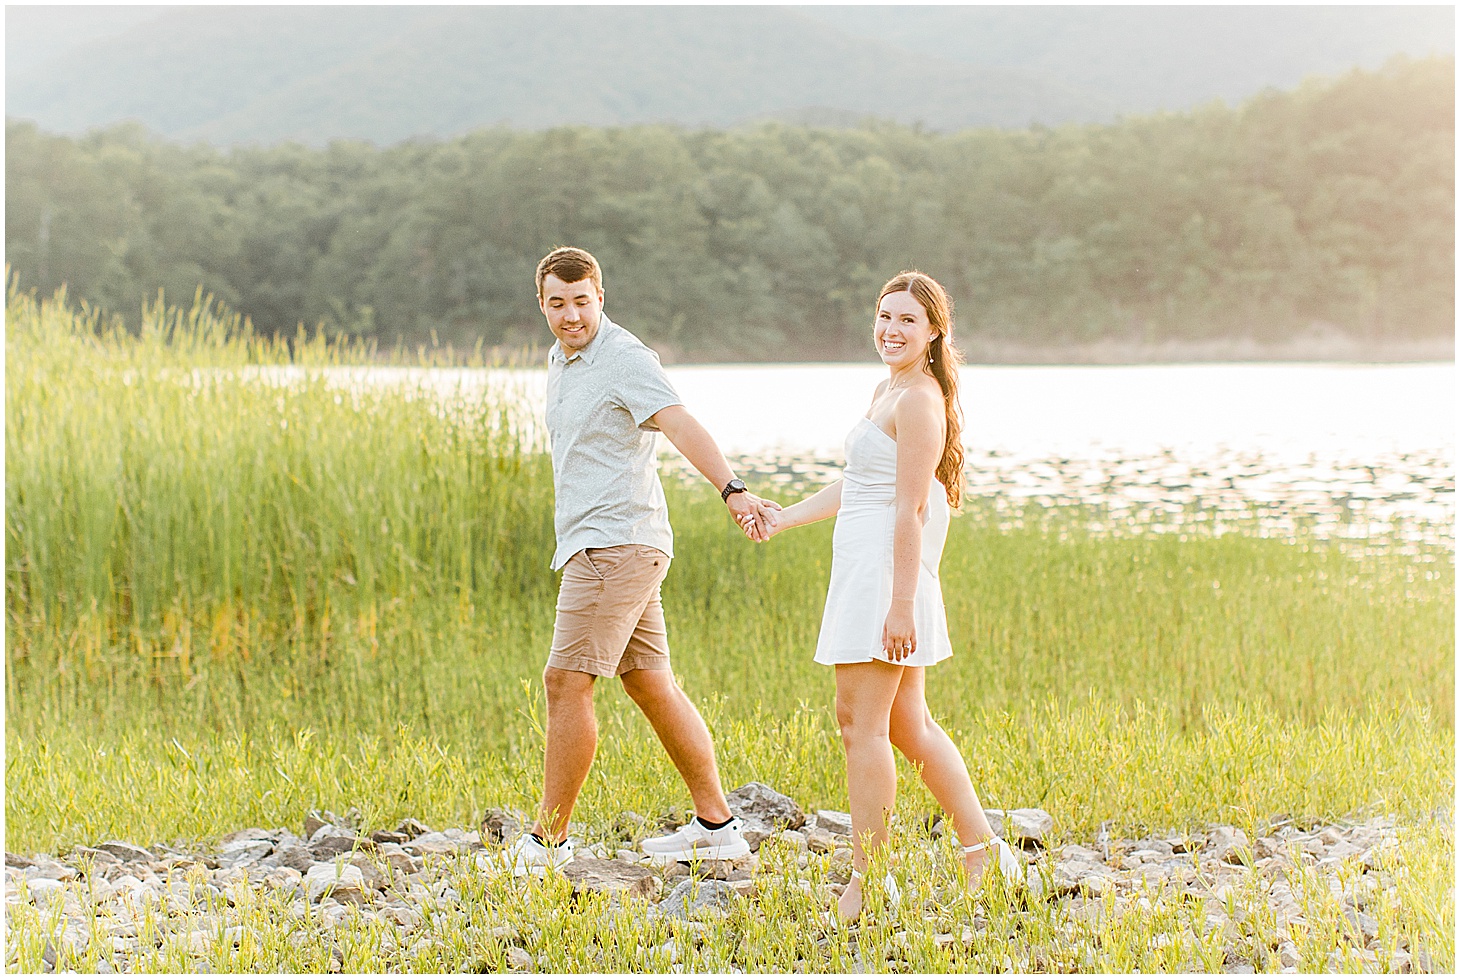 carvinscove_roanokeengagementsession_virginiaweddingphotographer_vaweddingphotographer_photo_0105.jpg